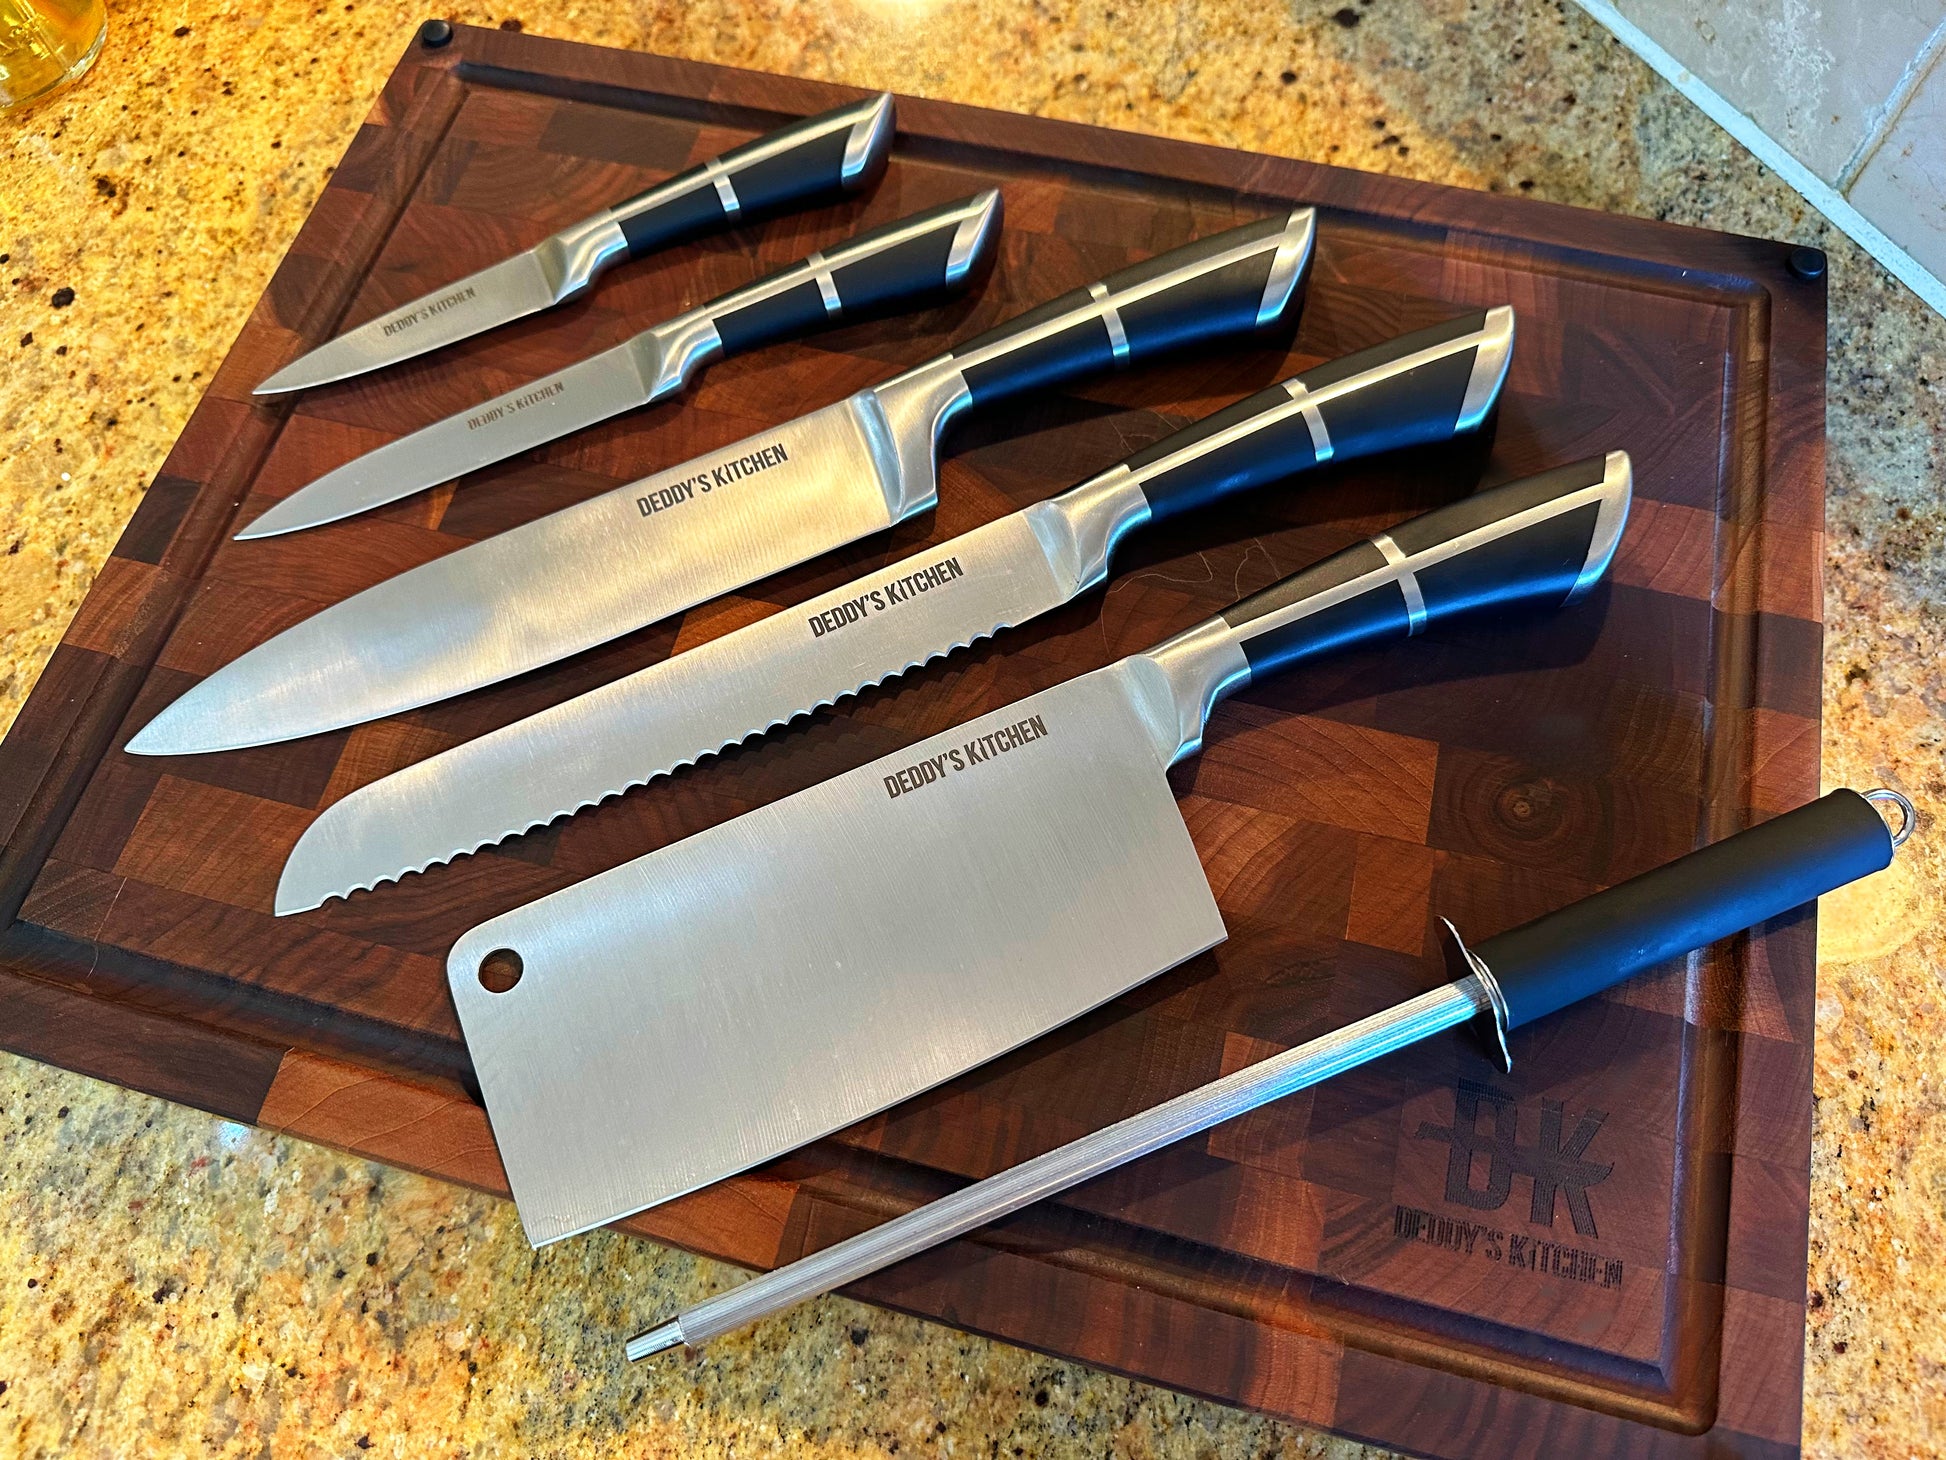  Kitchen Knife Set, 2 in 1 9-Pieces Chef Knife Set with